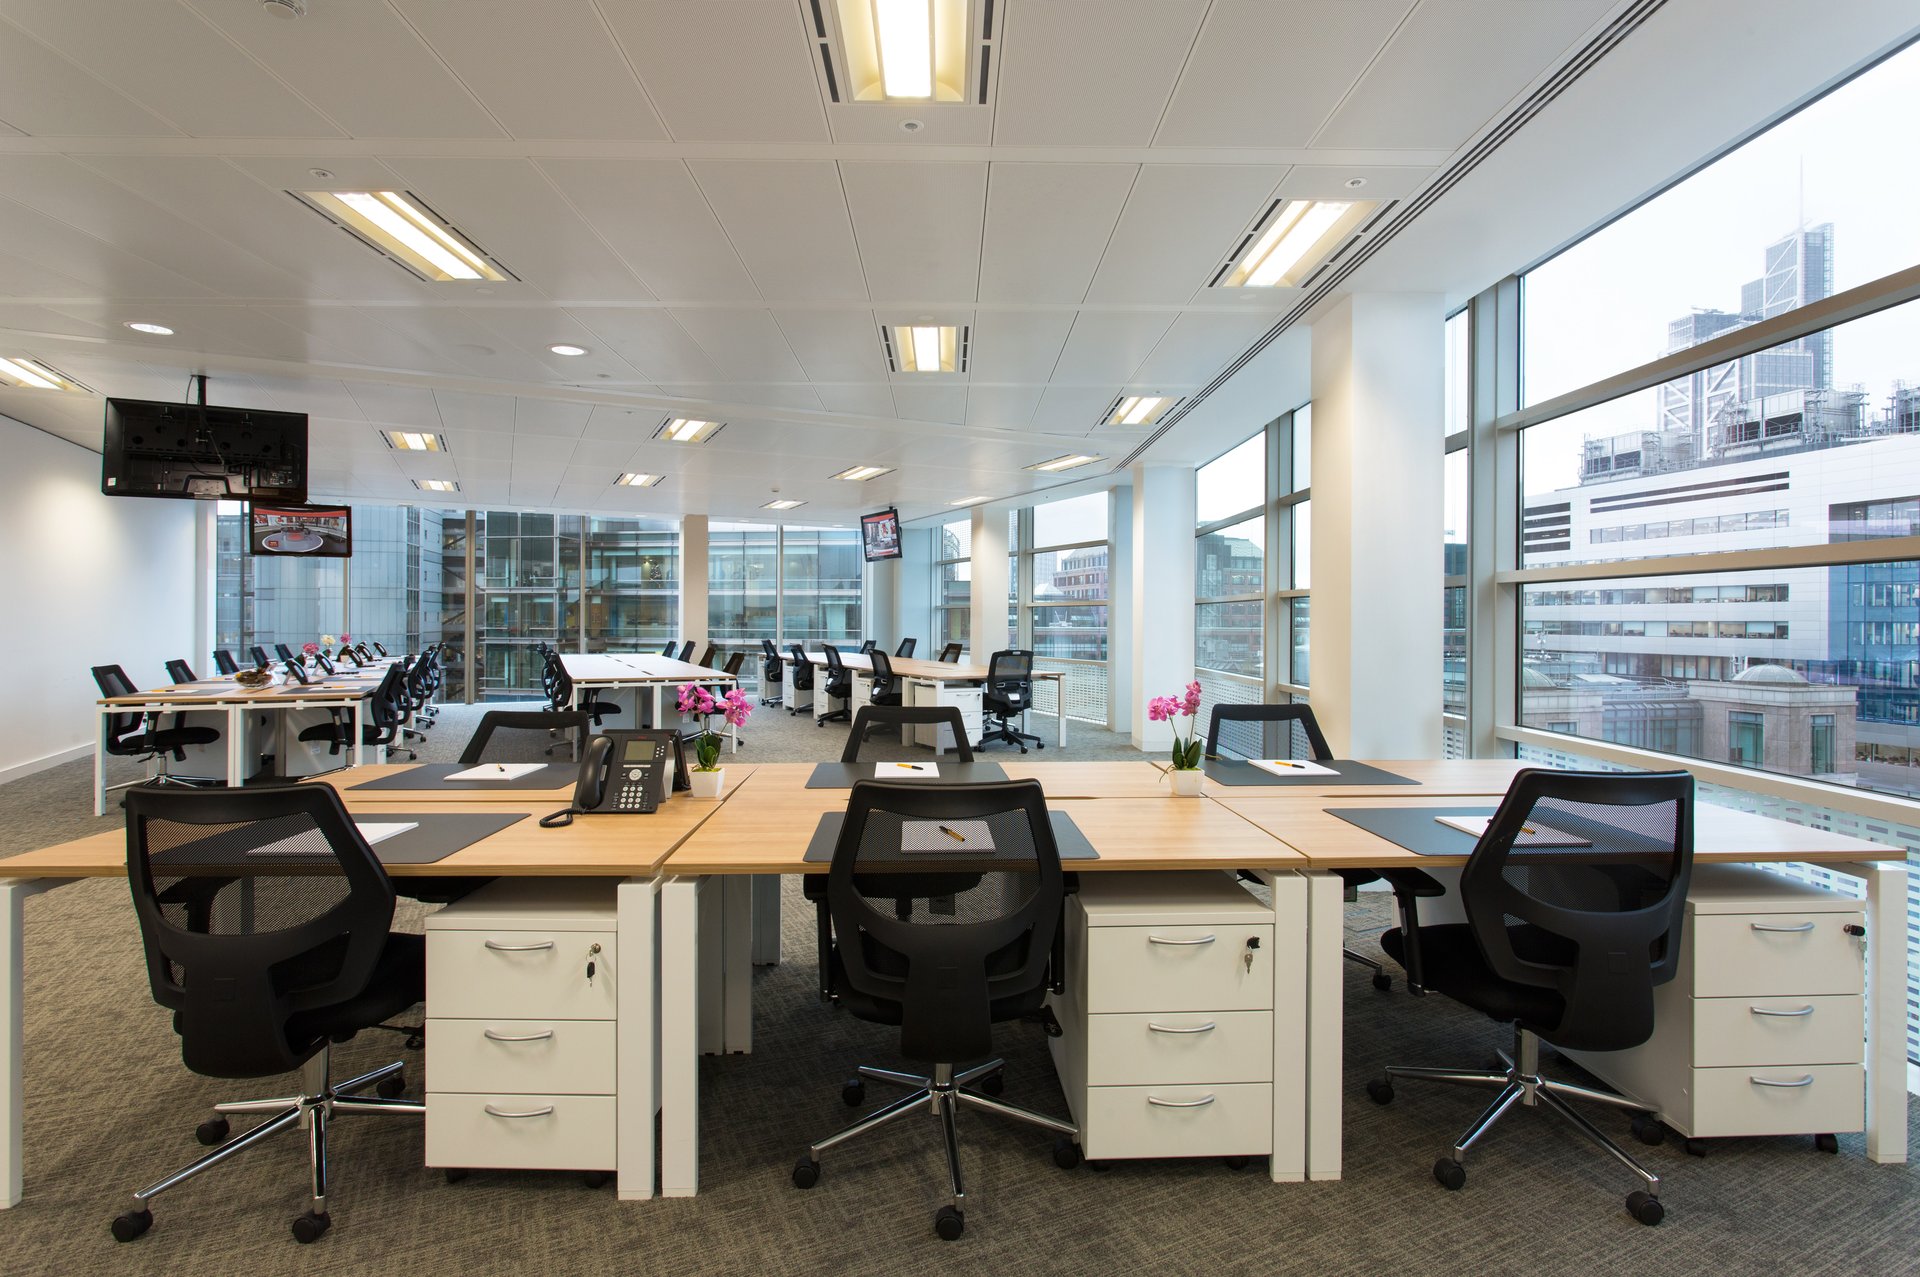 Interior of Bourne Offices - 30 Crown Place